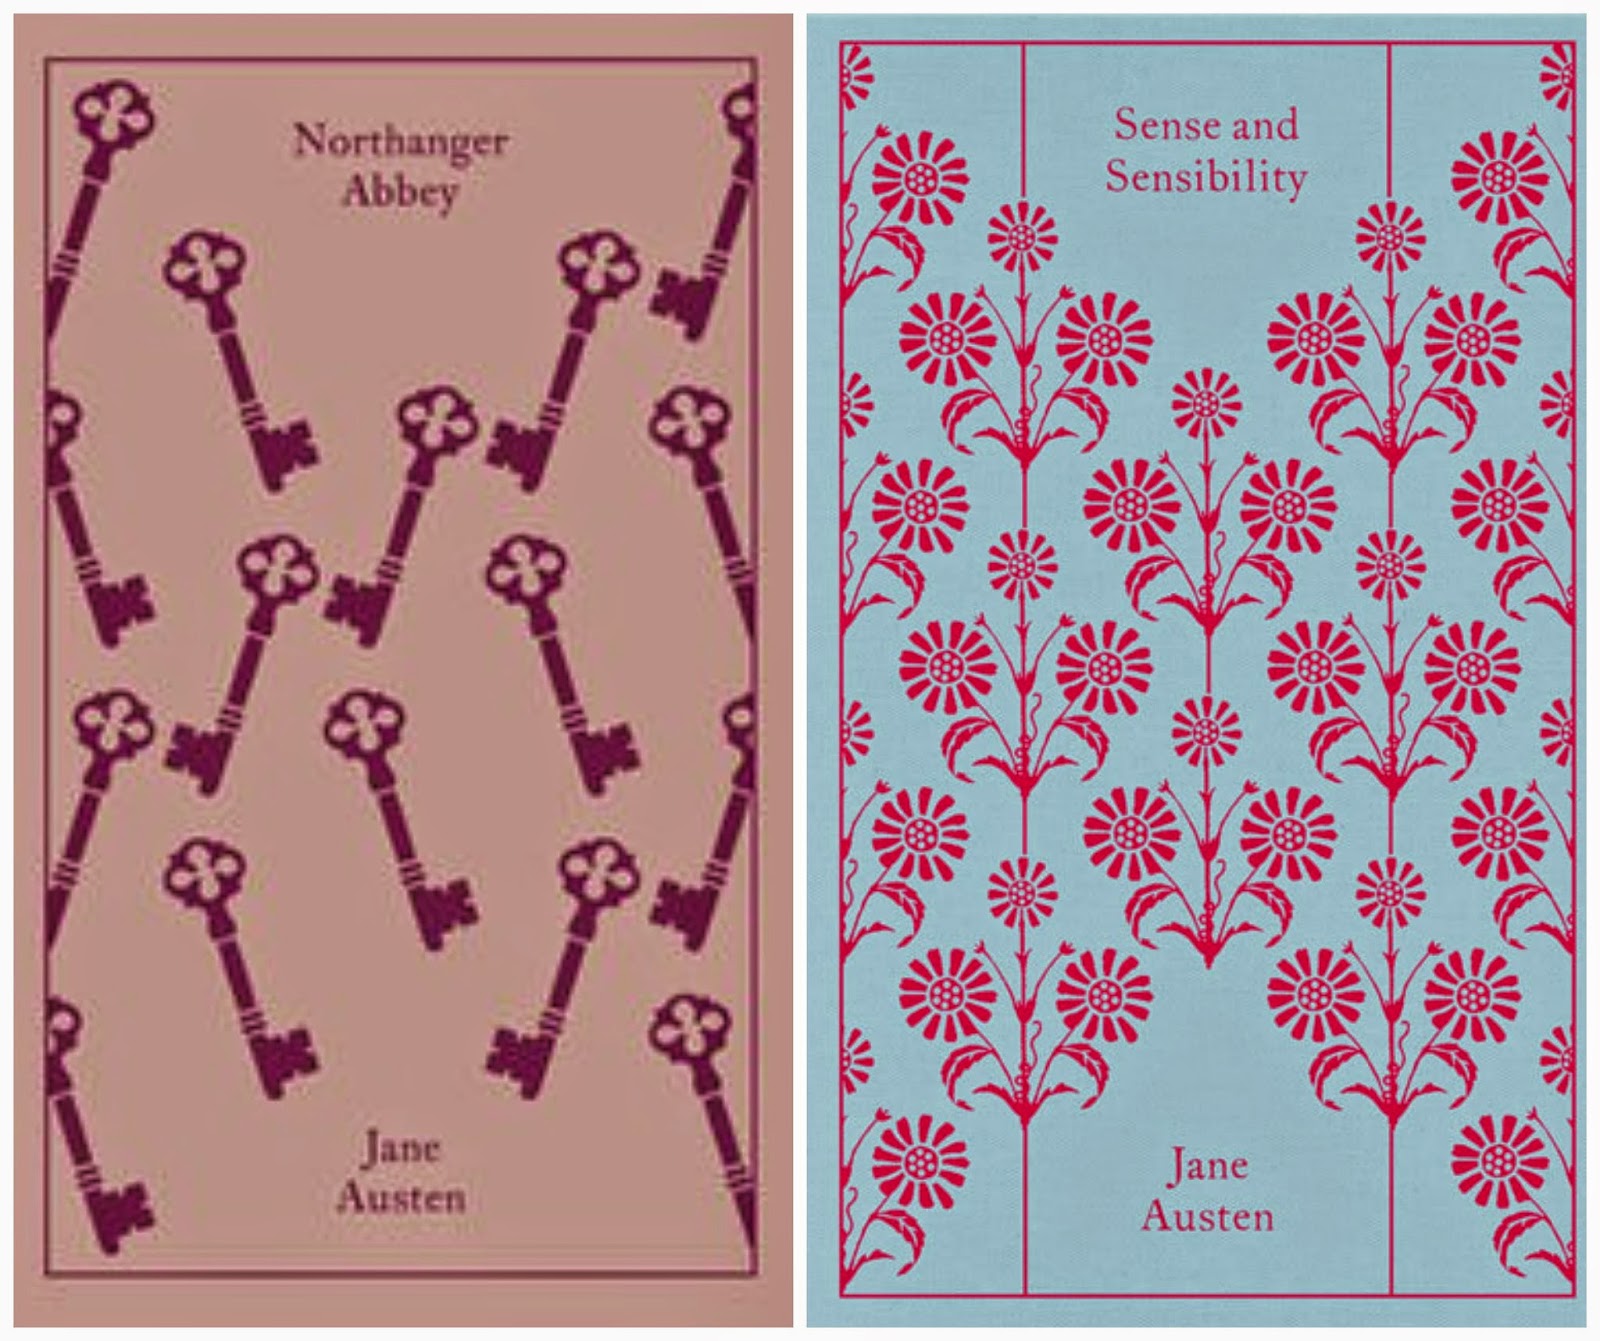 Northanger Abbey and Sense & Sensibility Book Covers